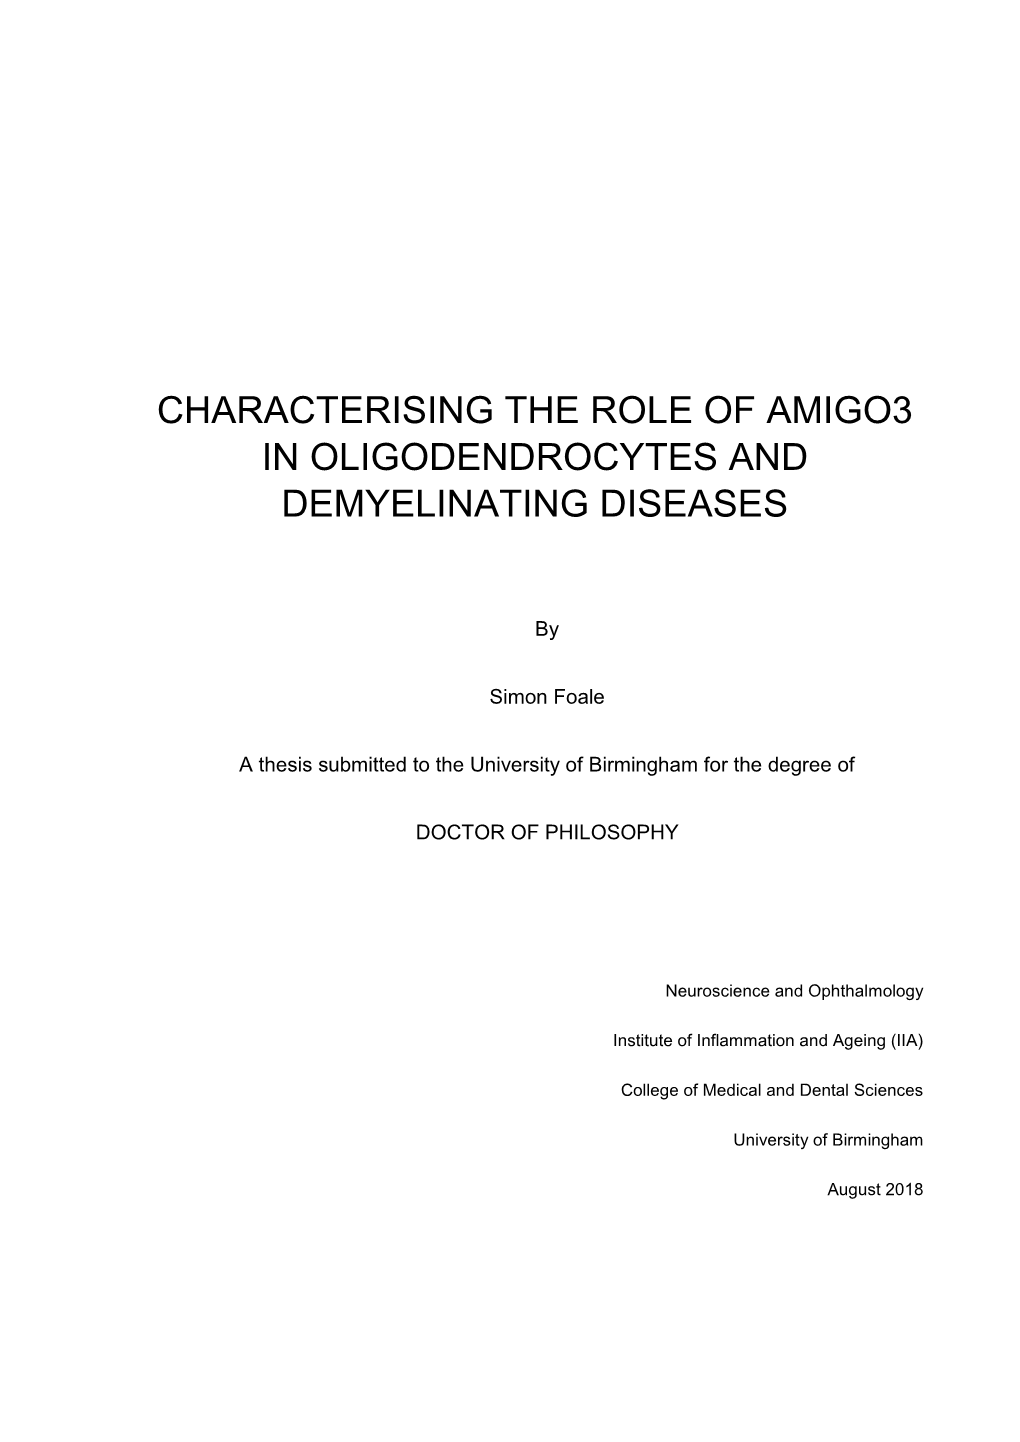 Characterising the Role of Amigo3 in Oligodendrocytes and Demyelinating Diseases